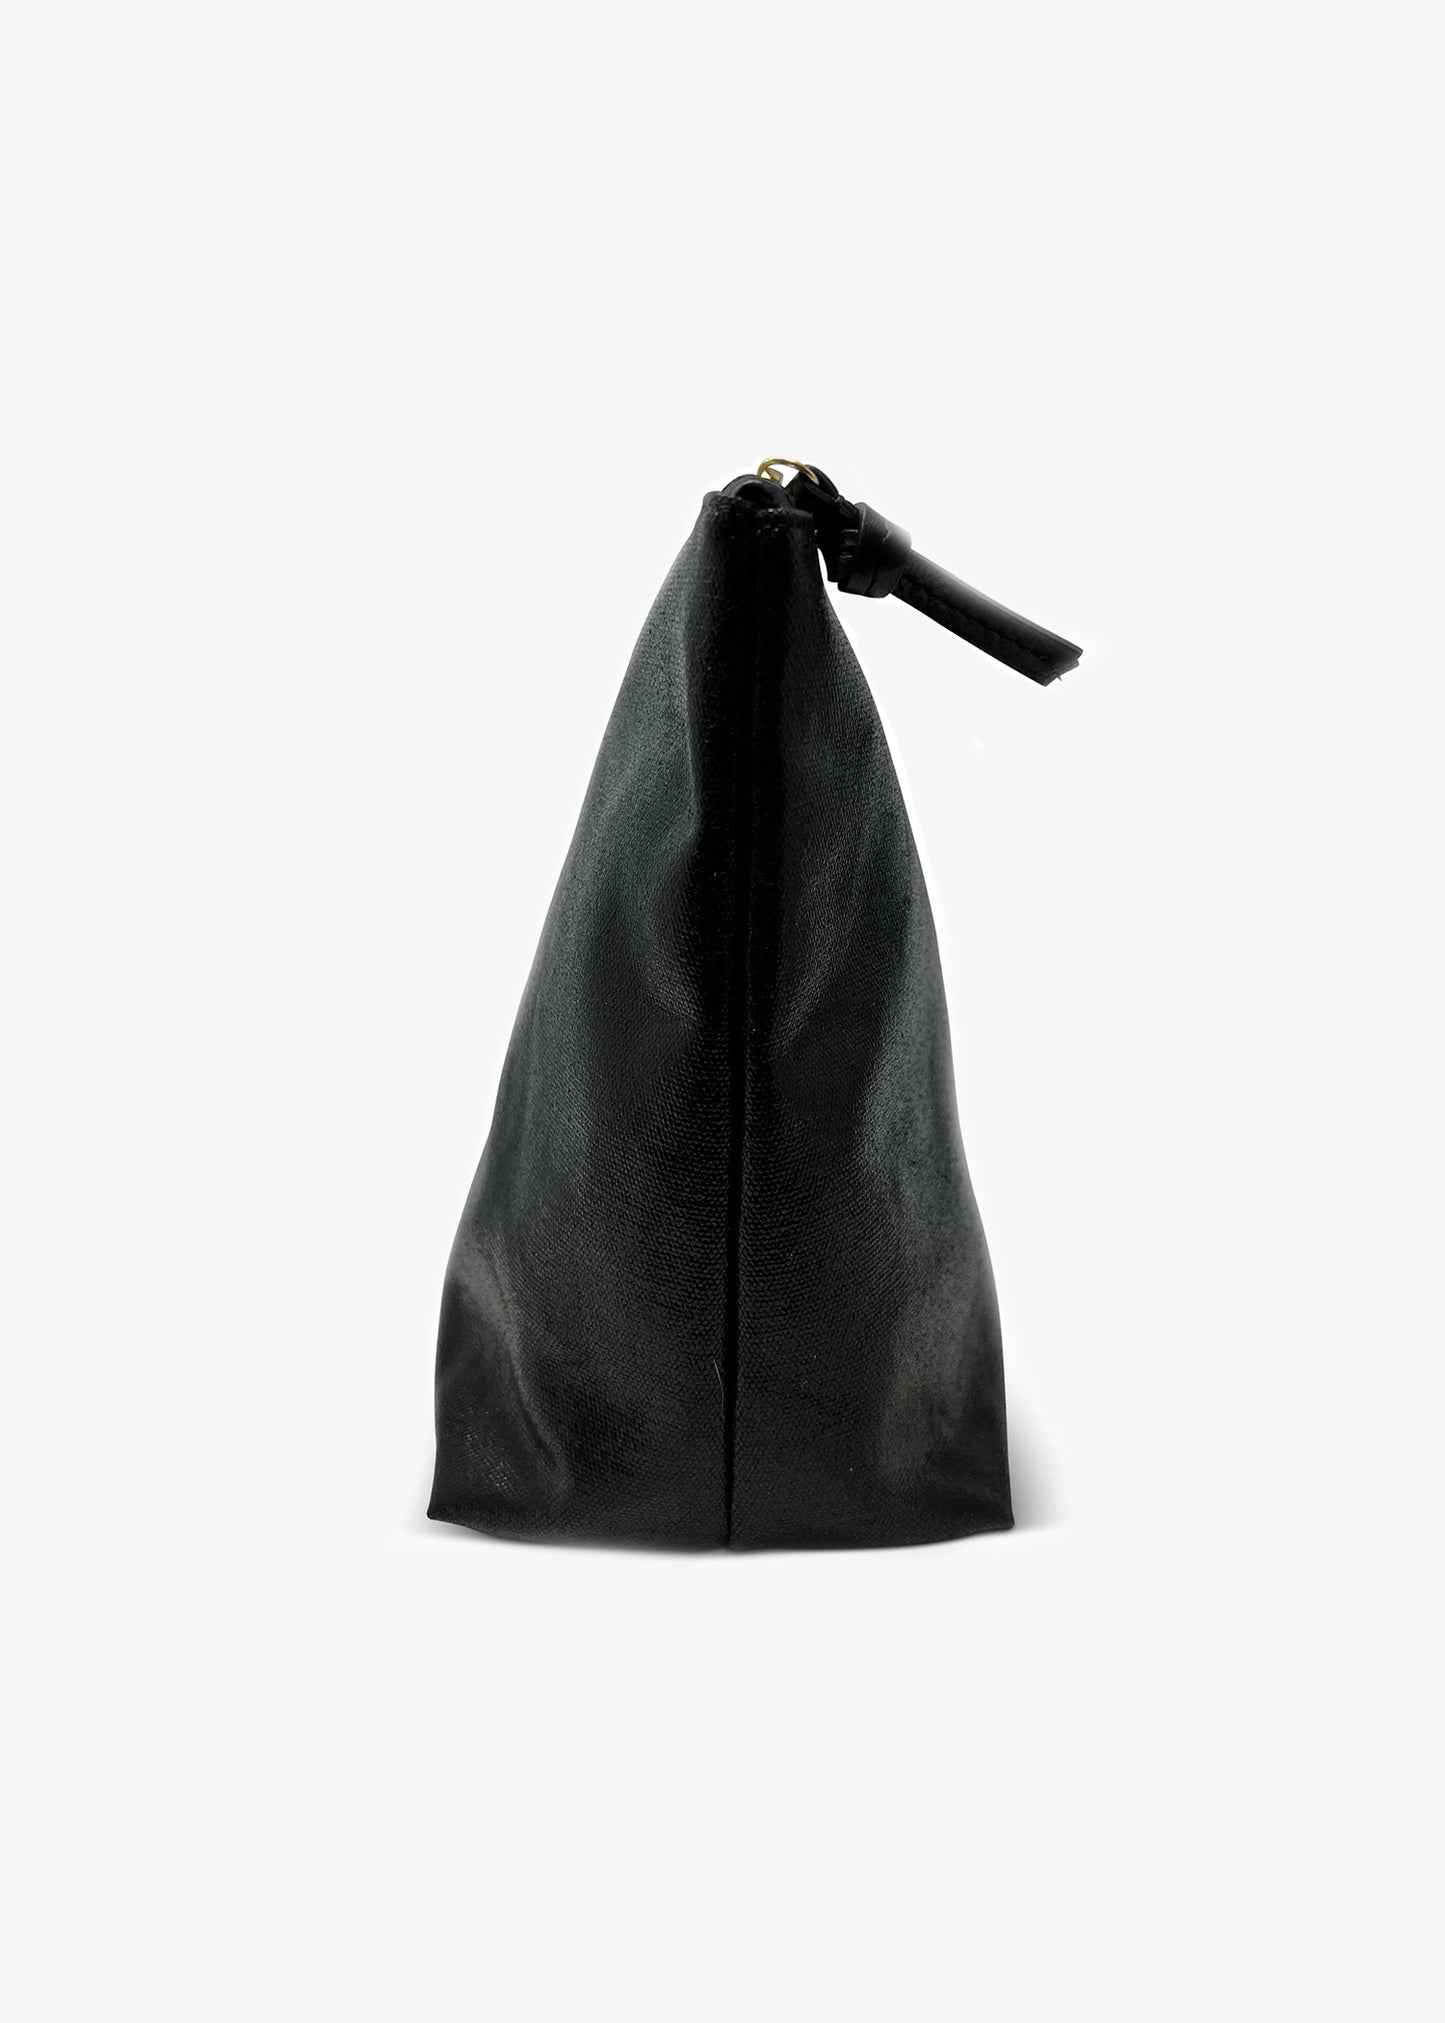 Kempton-and-Co-slick-black-canvas-oversized-pouch